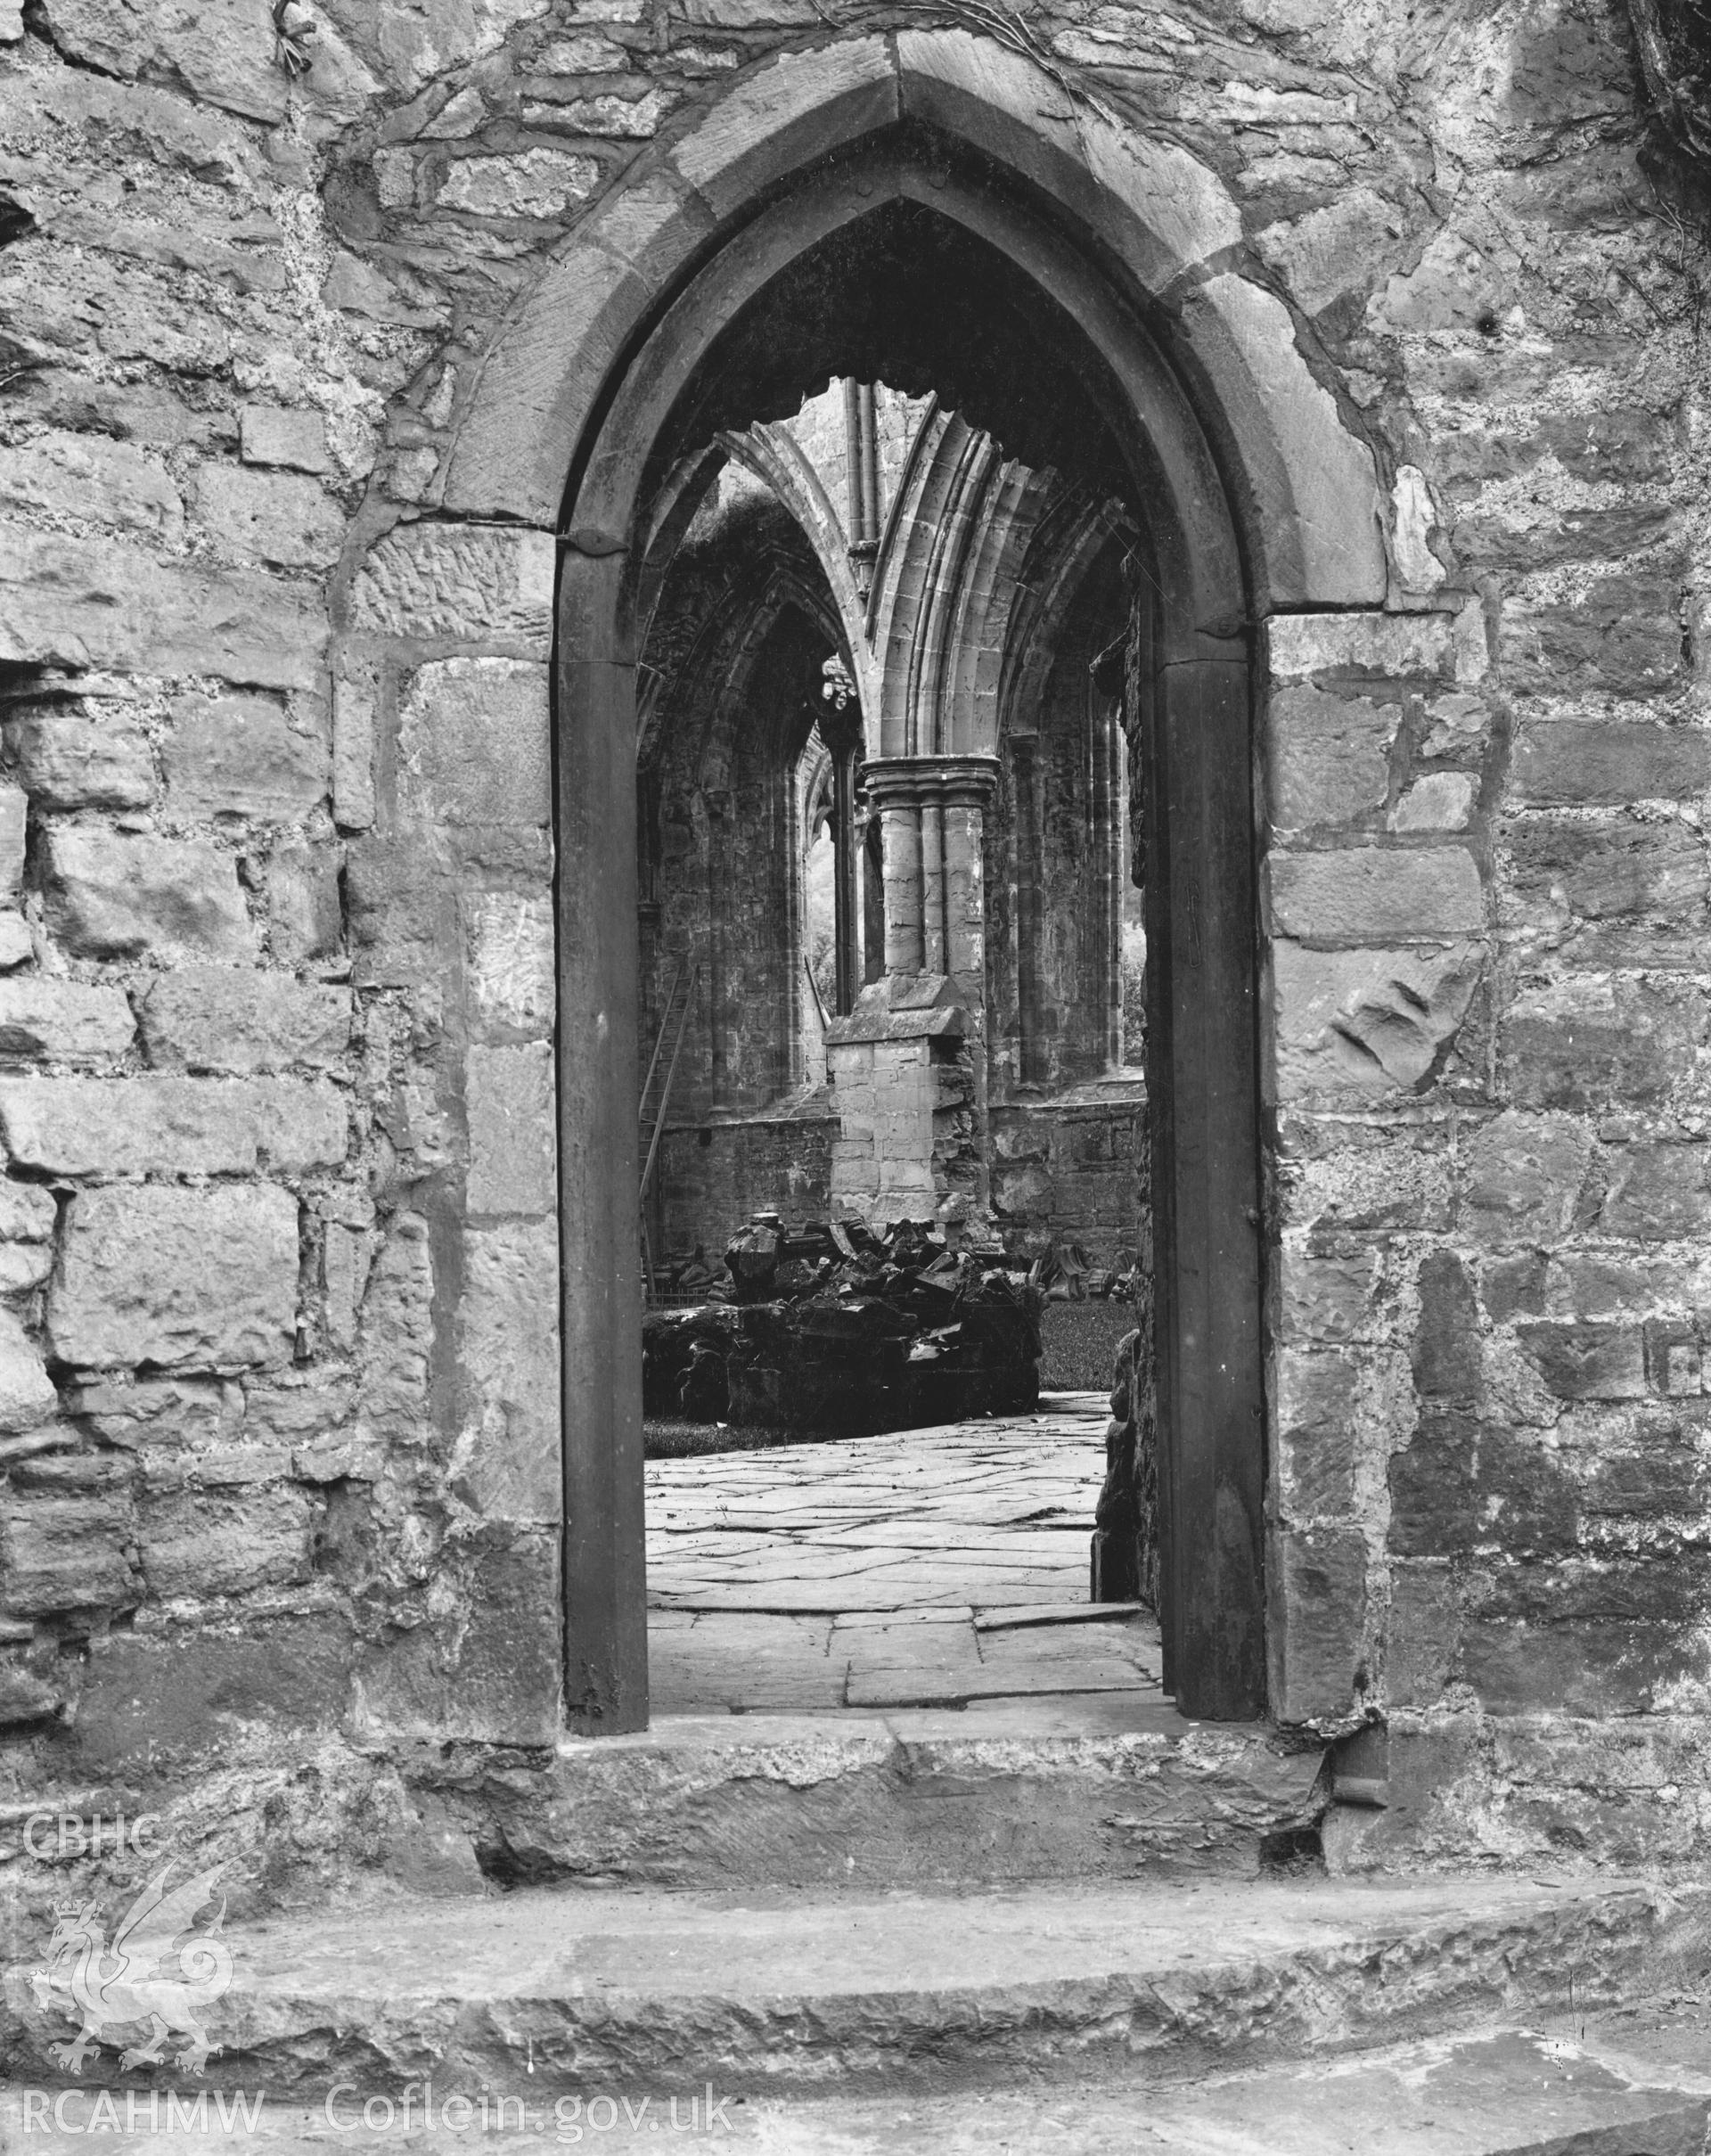 Digital copy of an early National Buildings Record photograph showing doorway from the cloister to the choir at Tintern Abbey.